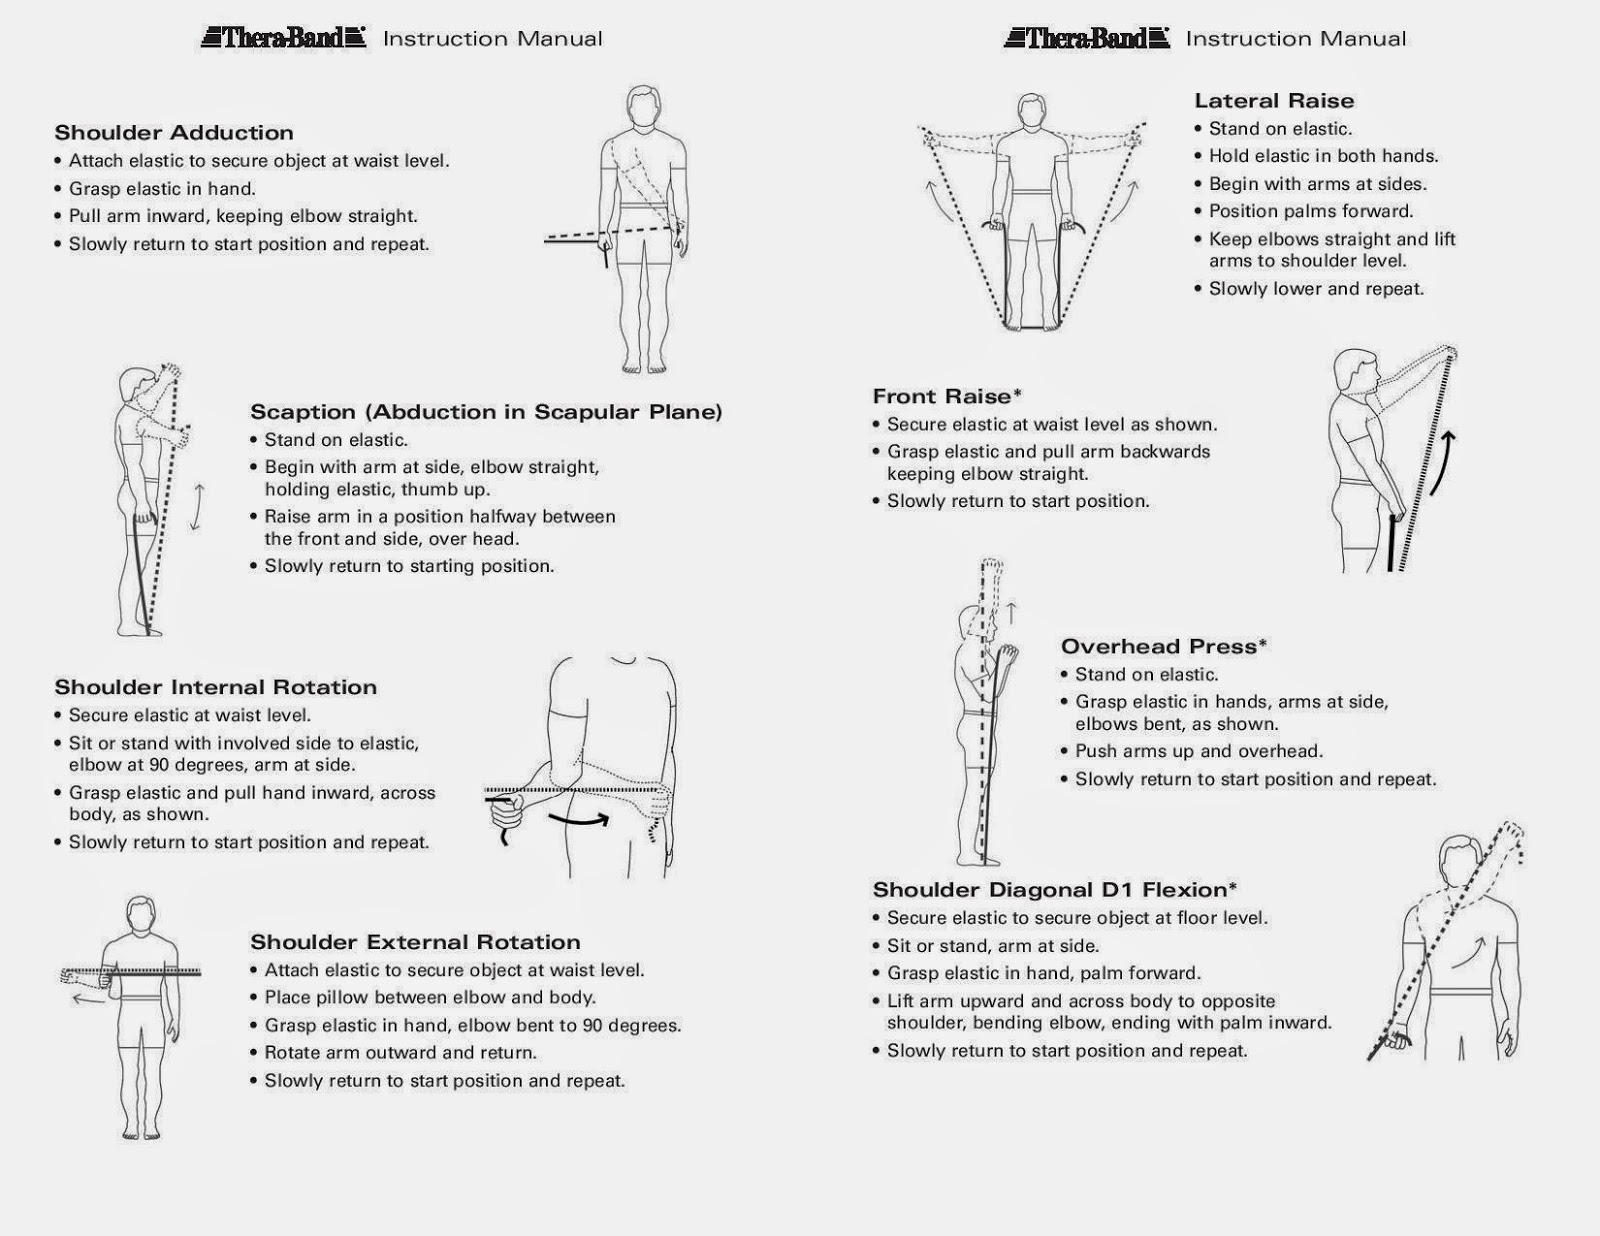 printable-upper-extremity-theraband-exercises-handout